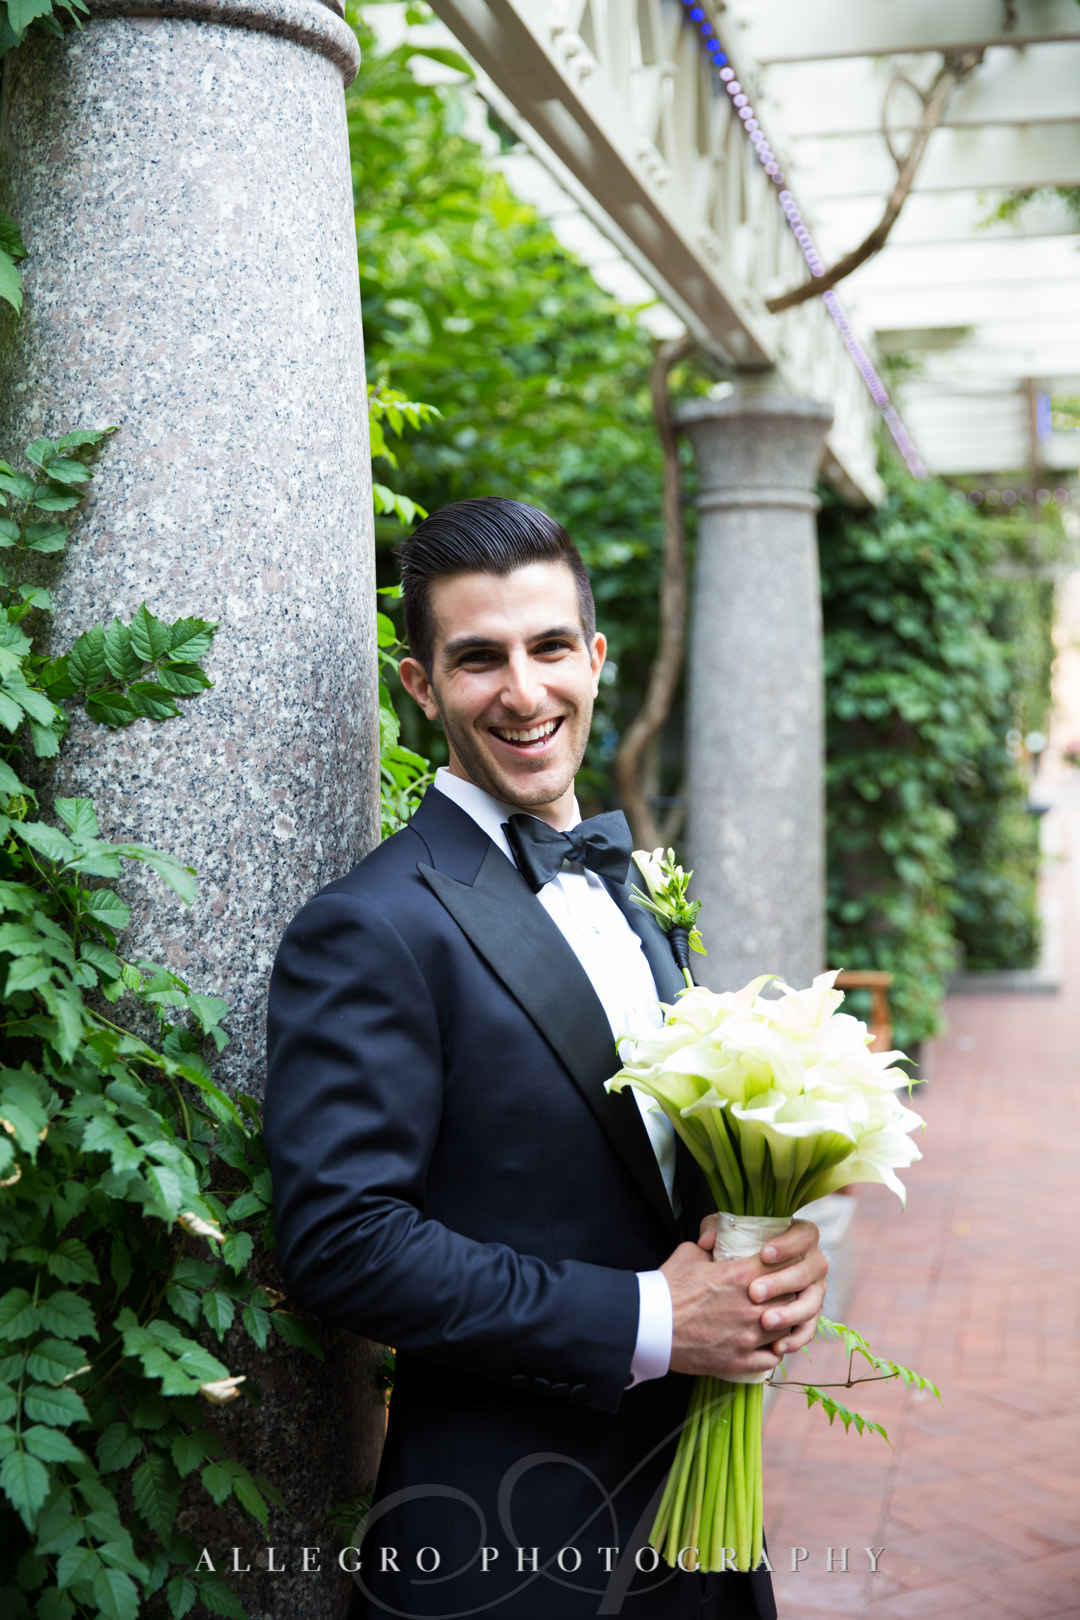 Groom poses with bouquet